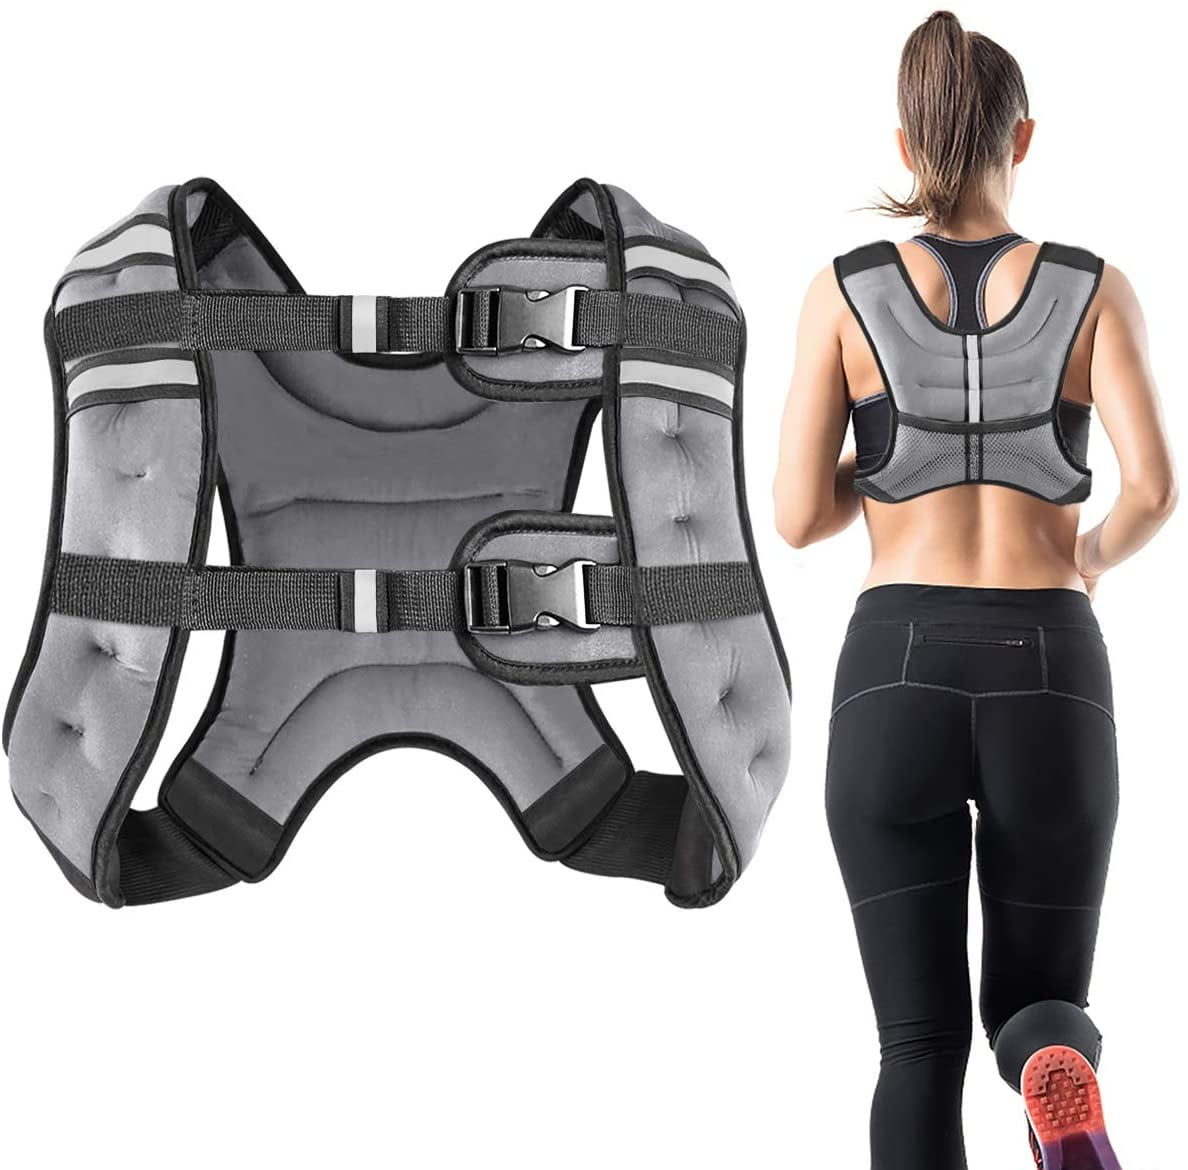 Weighted Jacket Vest Gym Running Exercise Strength Resistance Training 15kg 